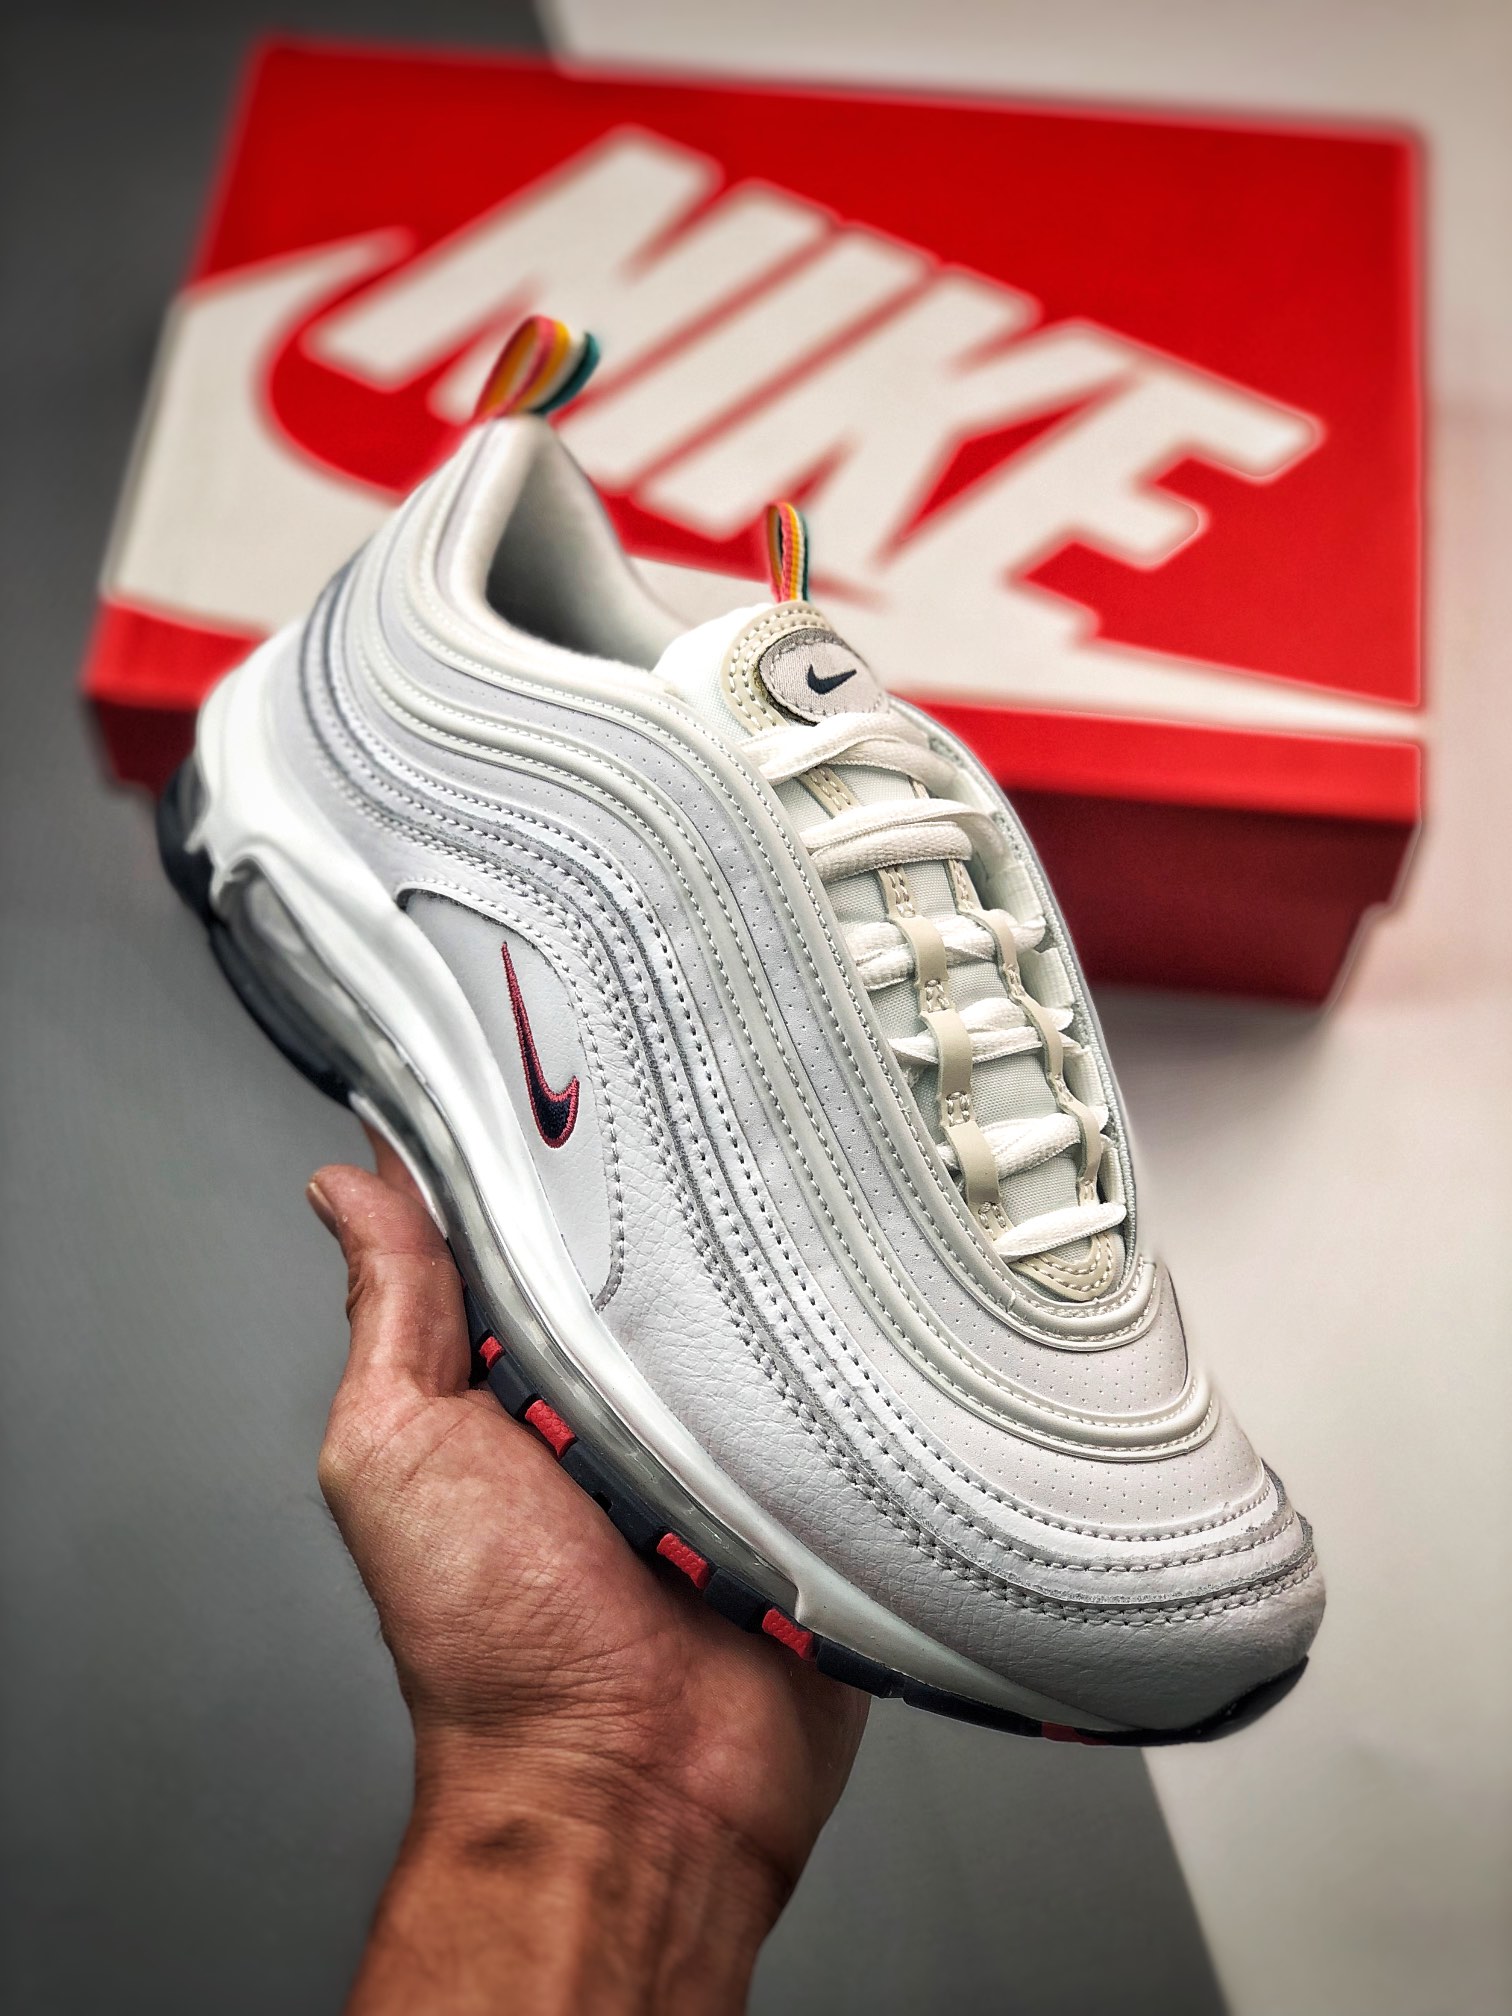 Nike Air Max 97 White Multicolor DH1592-100 Shoes